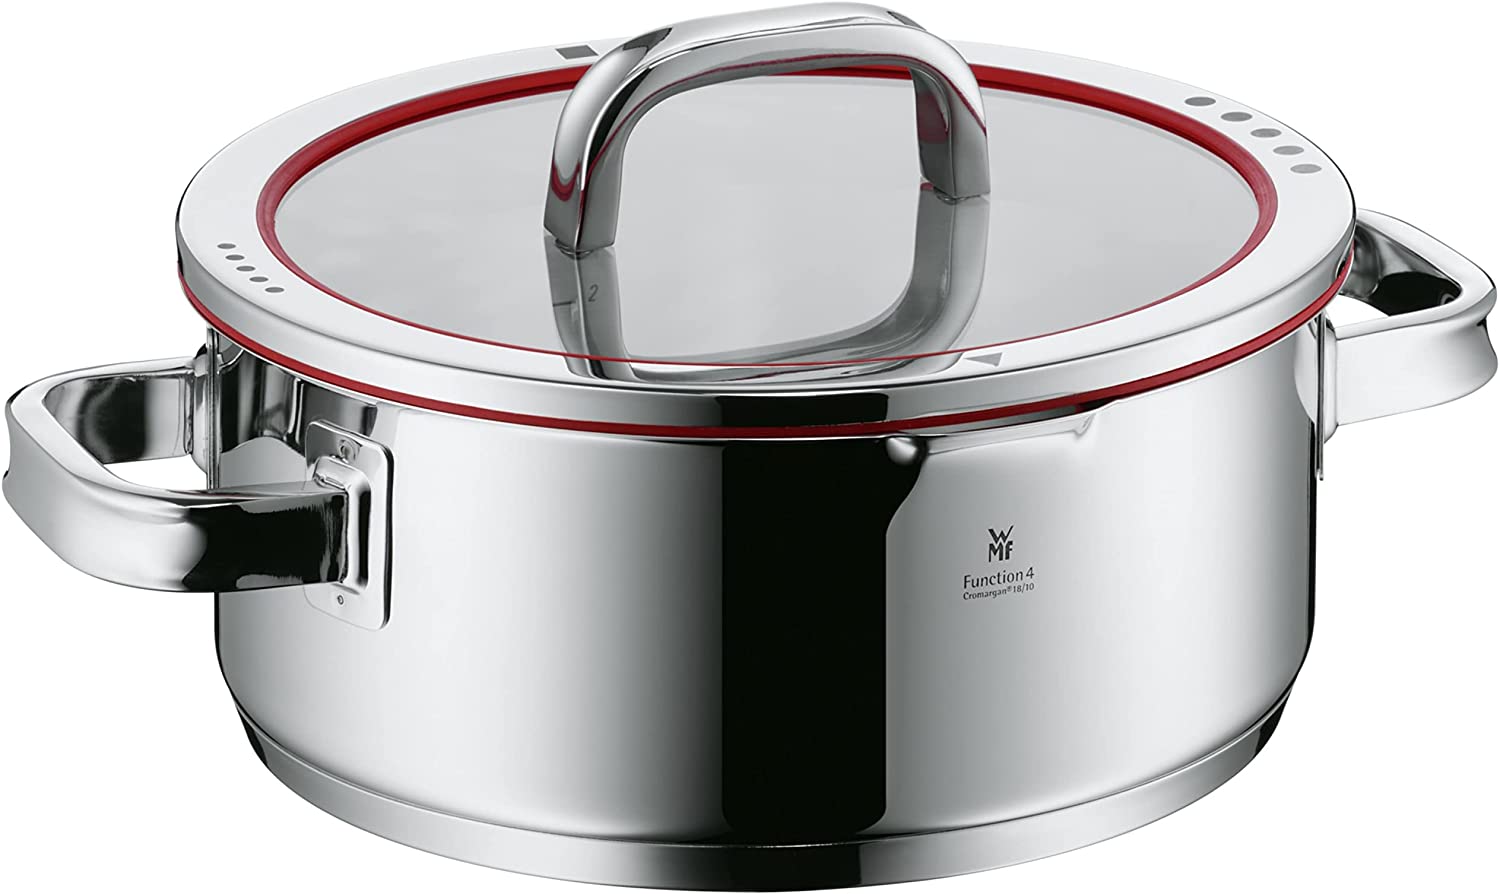 WMF cookware Ø 24 cm approx. 4,1l Function 4 Inside scaling lid - pour off or decant liquids without spilling to keep your dishes and cooker clean. Hollow side handles glass lid Cromargan stainless steel brushed suitable for all stove tops including induction dishwasher-safe